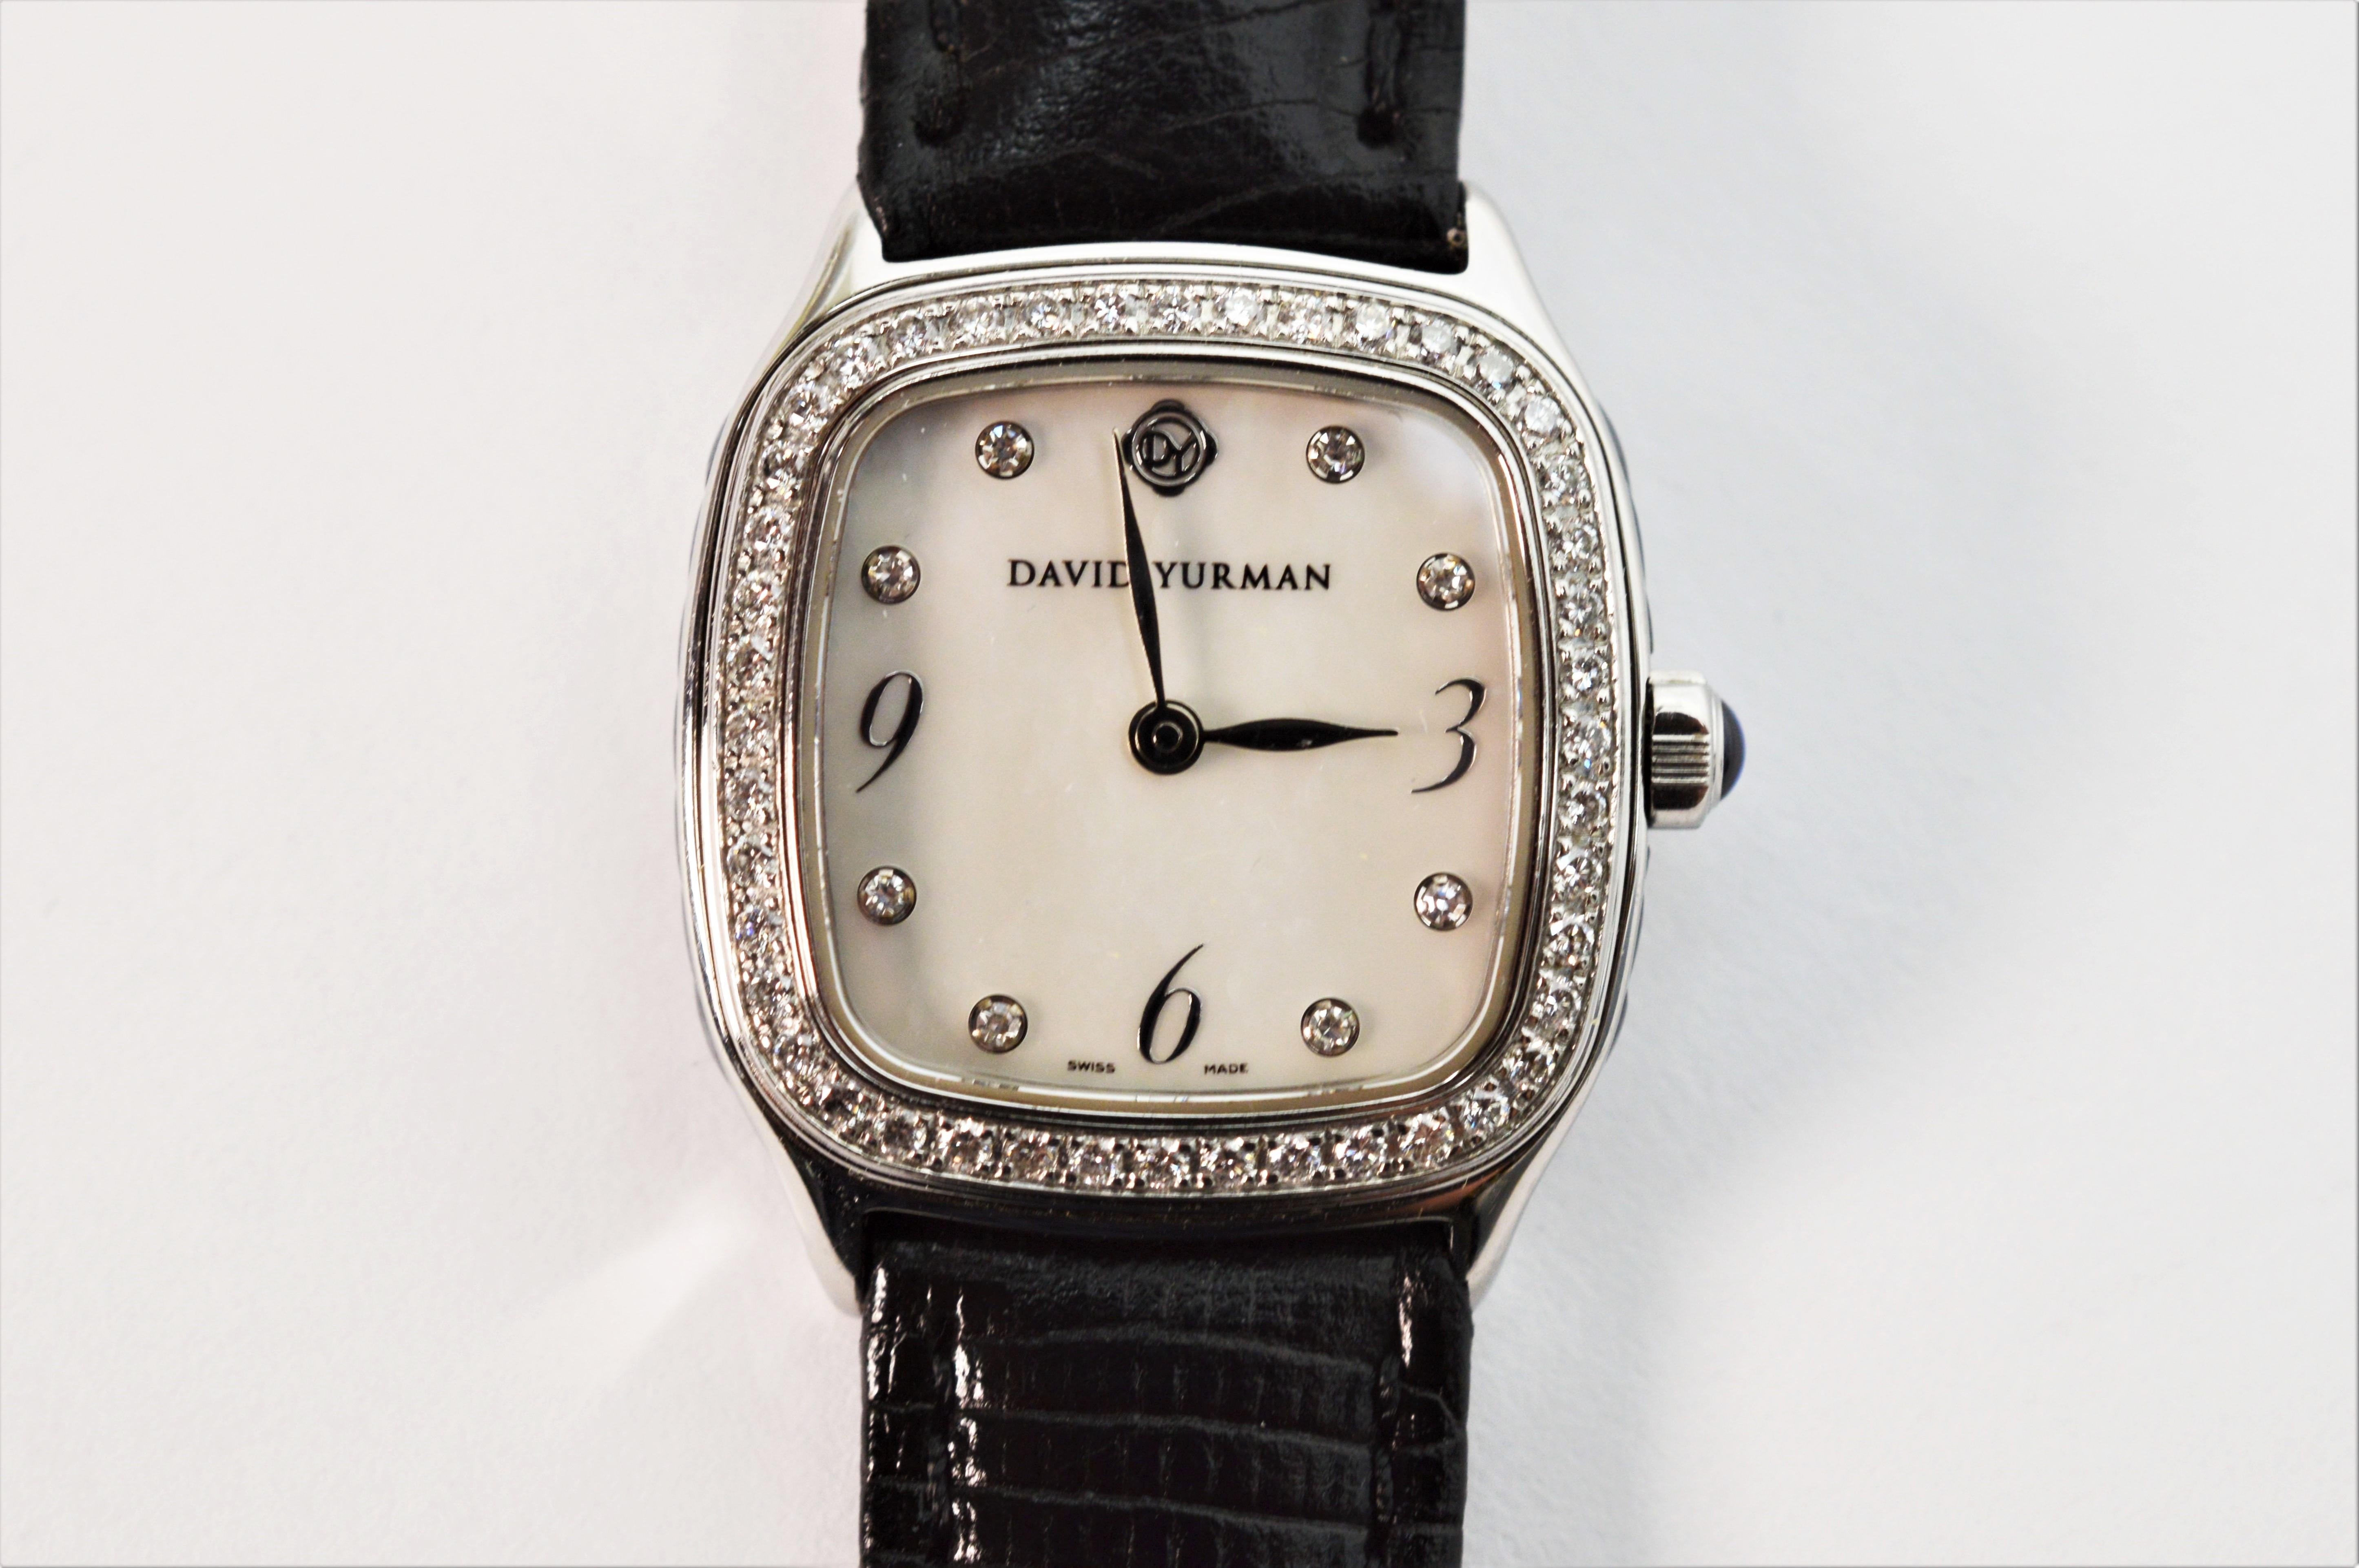 From the David Yurman Thoroughbred Collection , Ladies Stainless Steel Diamond Wrist Watch T304-XSST with Mother of Pearl face.  Sporting a slim line with a case size of 25mm ( approximately 1 inch square) this lovely ladies Swiss made quartz